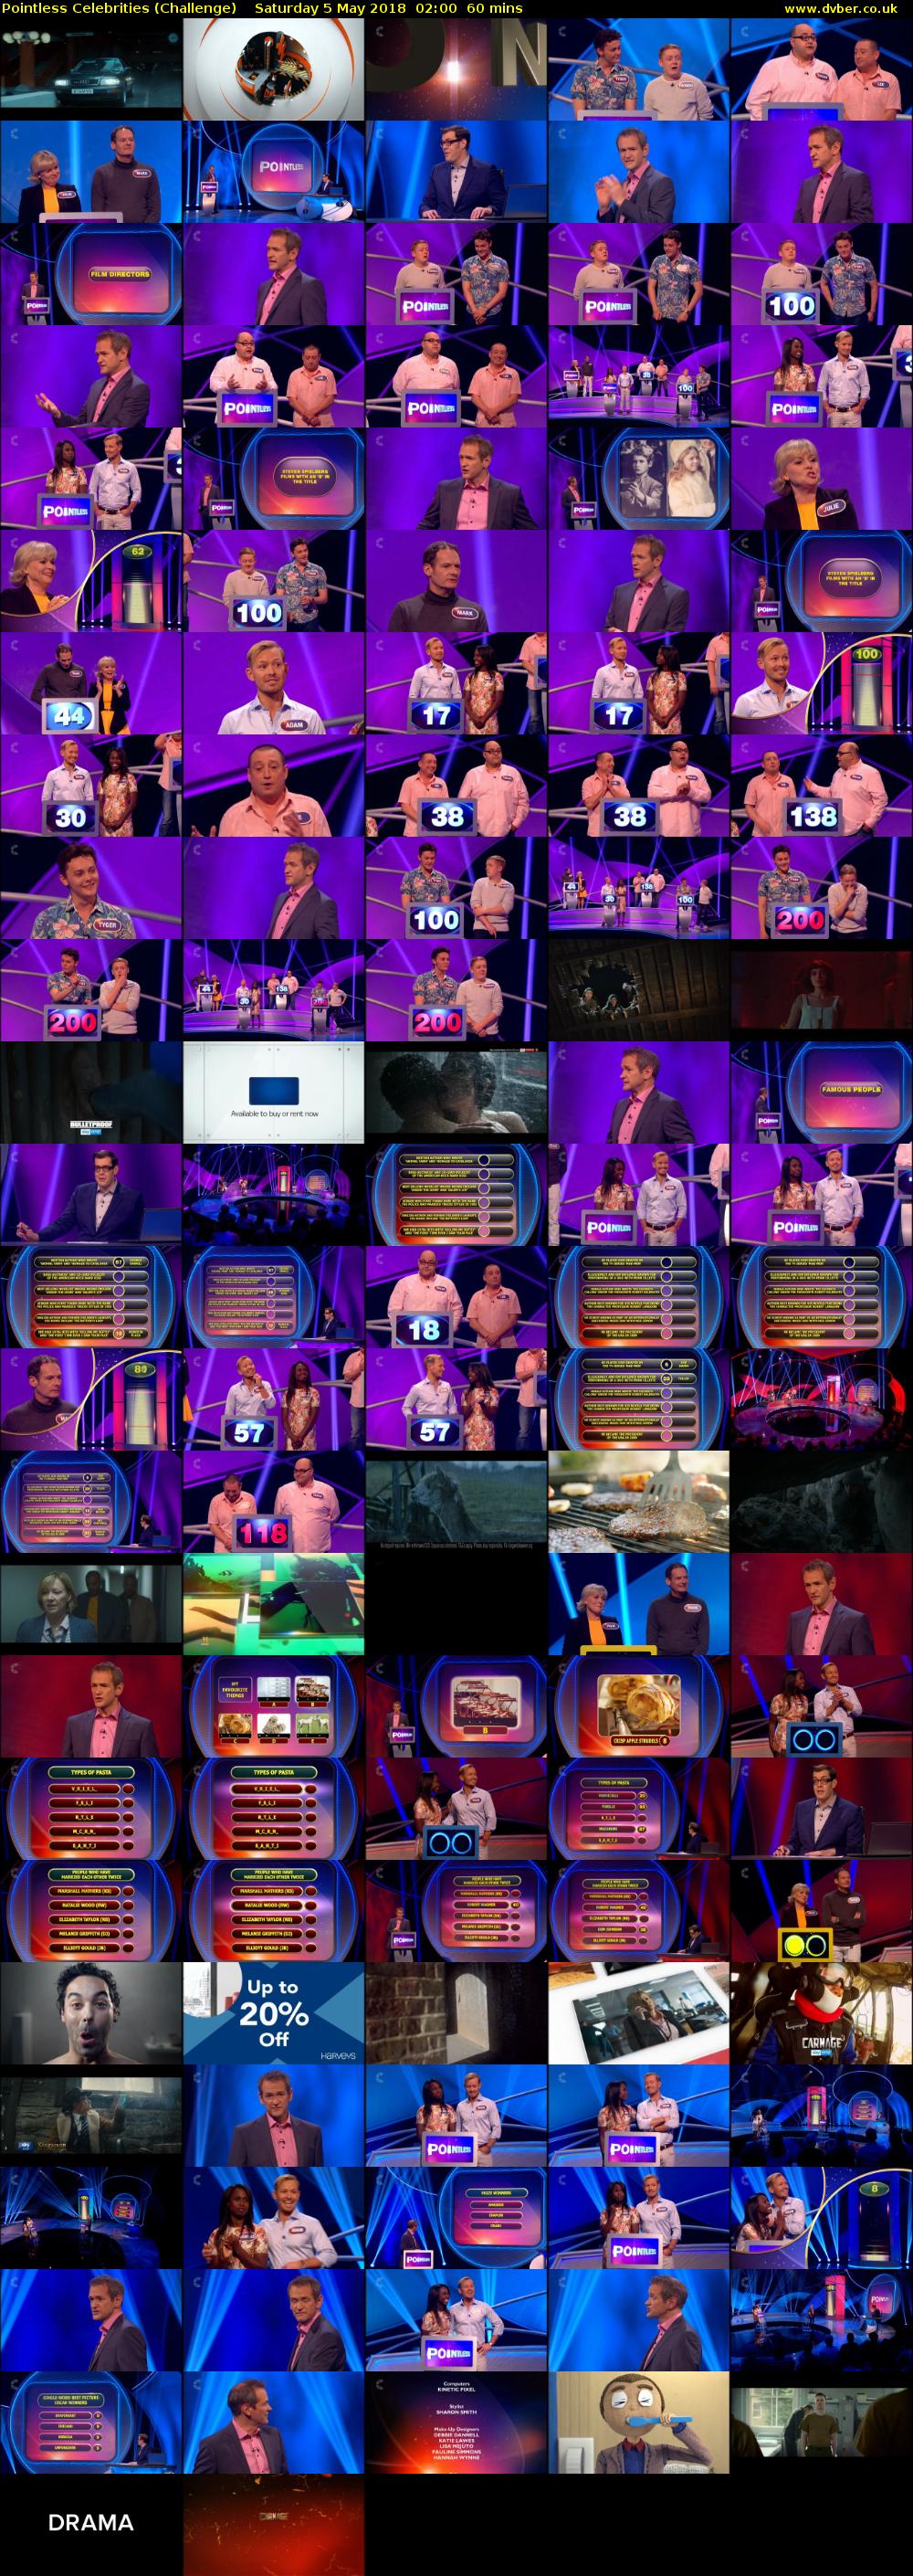 Pointless Celebrities (Challenge) Saturday 5 May 2018 02:00 - 03:00